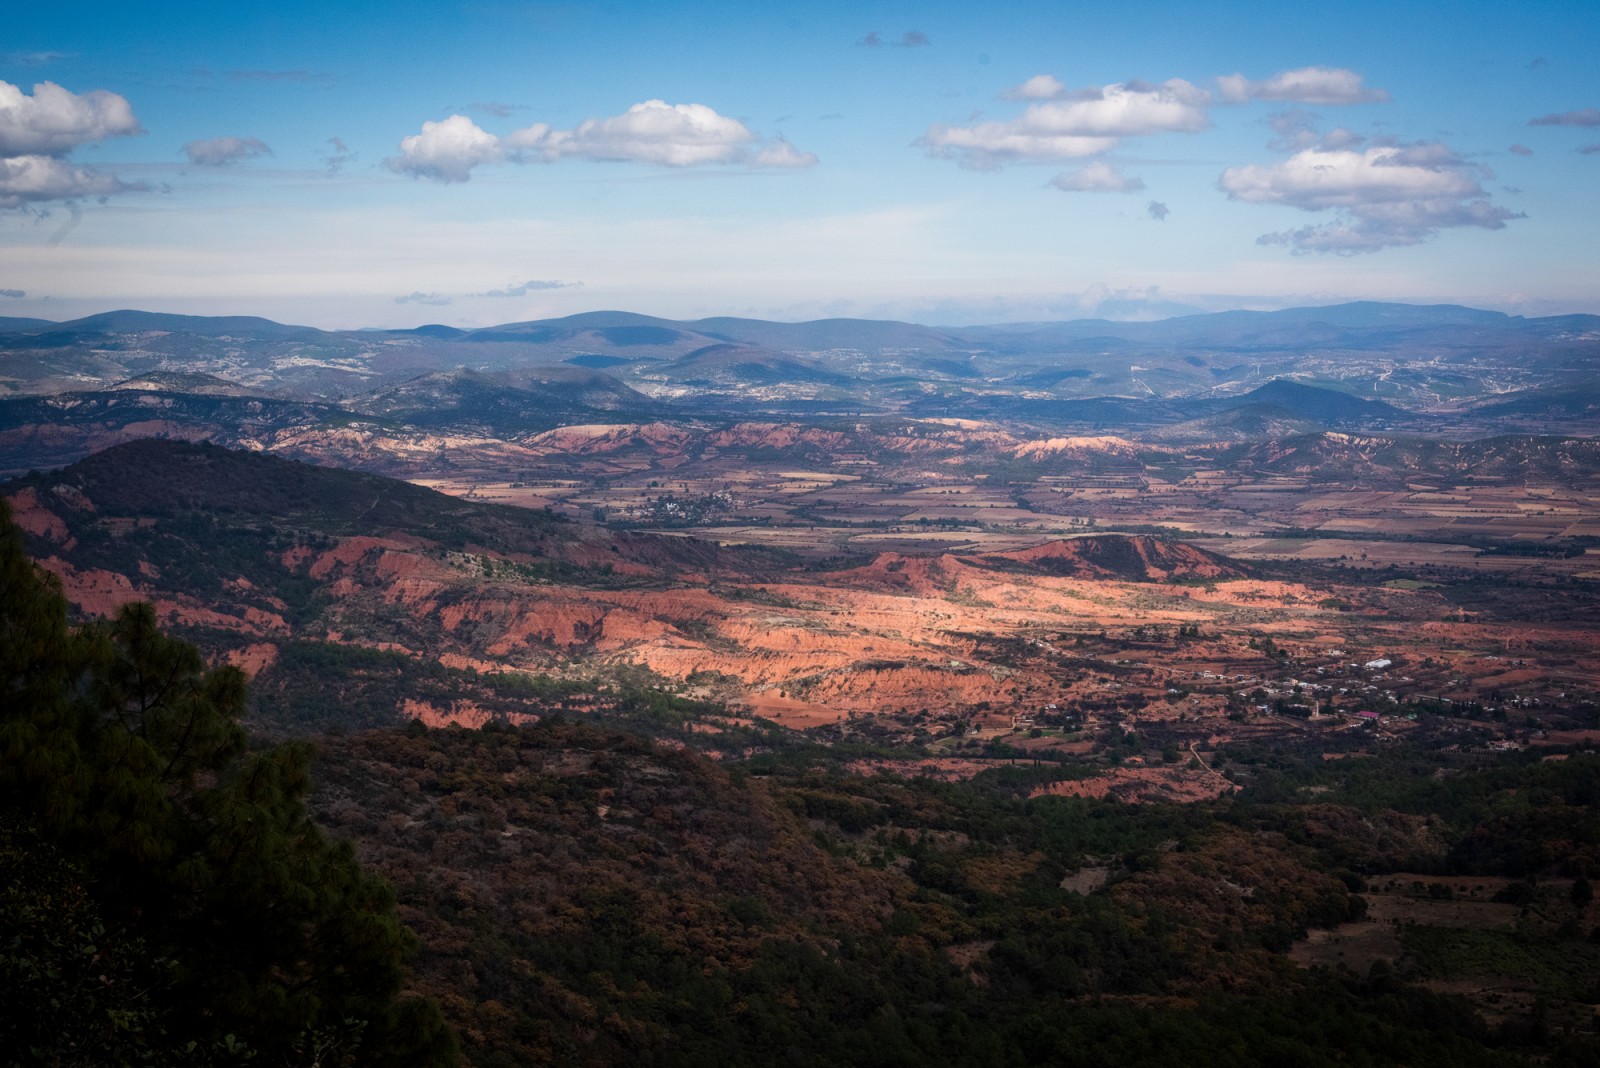 Mixteca Alta Geopark, Oaxaca, Mexico, View from Yucu ñuun lookout, Photo by visual journalist Alex McDougall, 2021 © Alex McDougall (photo), Courtesy of the artist.